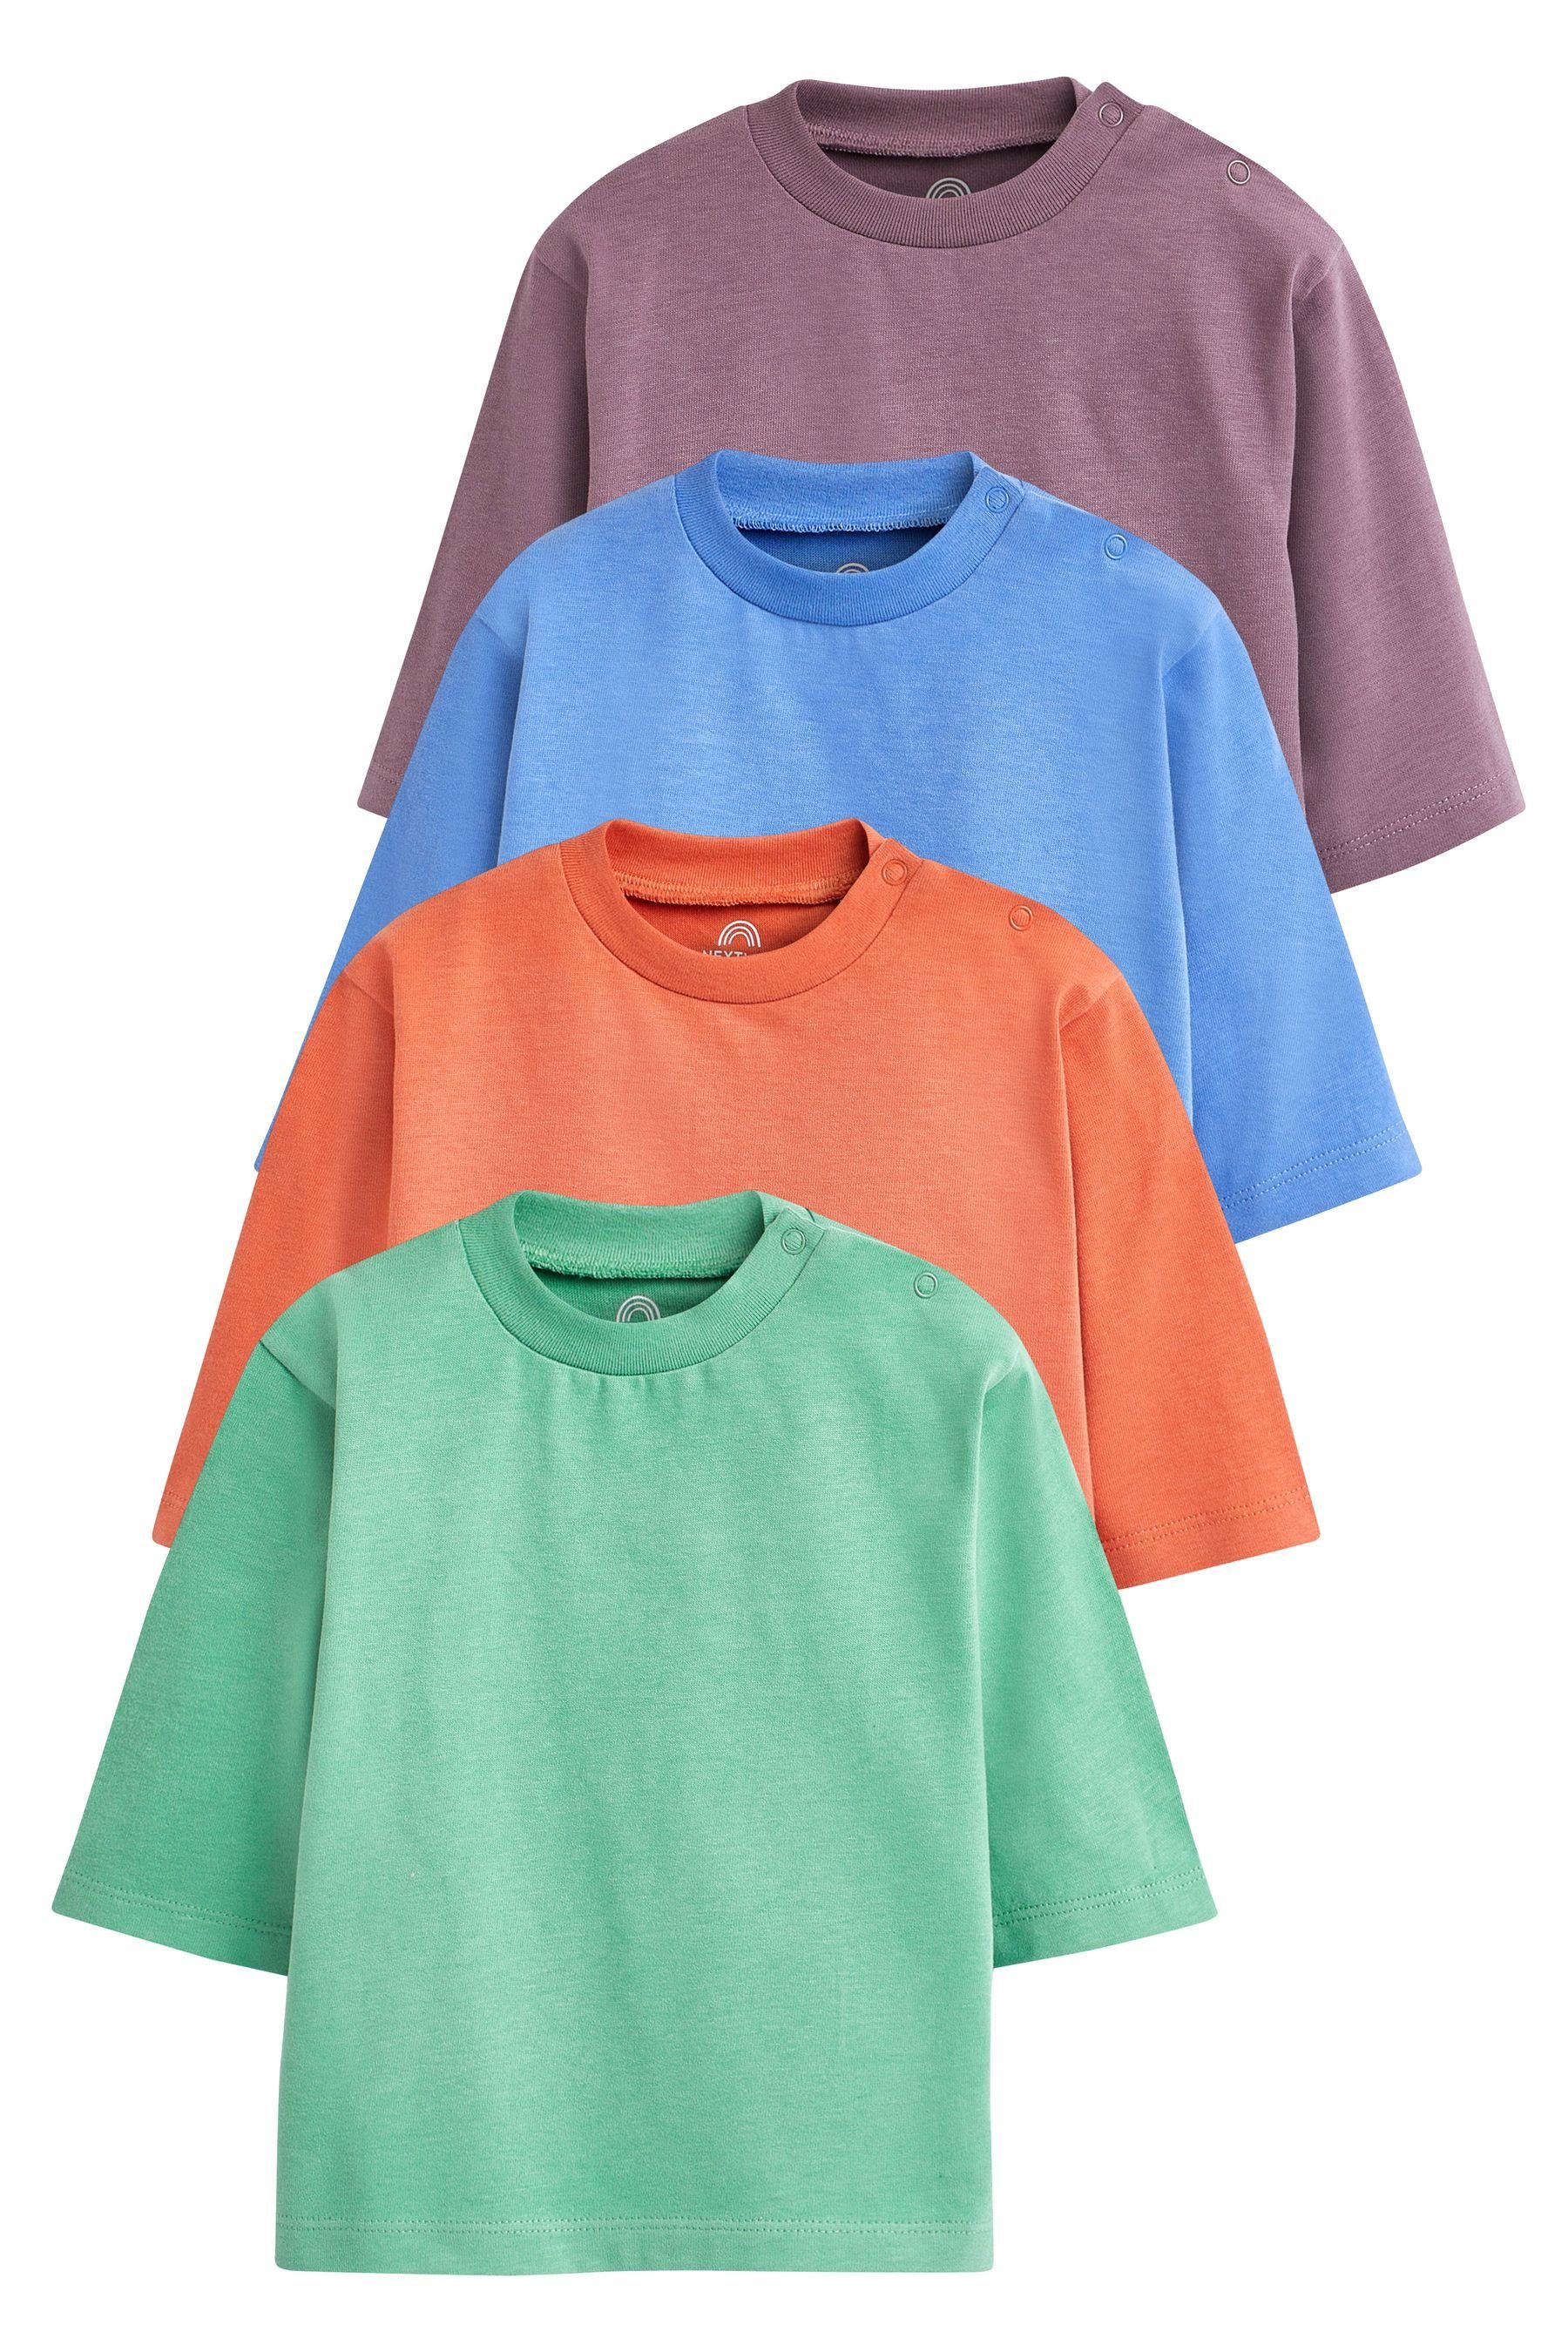 Next Langarmshirt 4er-Pack langärmelige Baby-T-Shirts (4-tlg) Bright Relaxed Fit